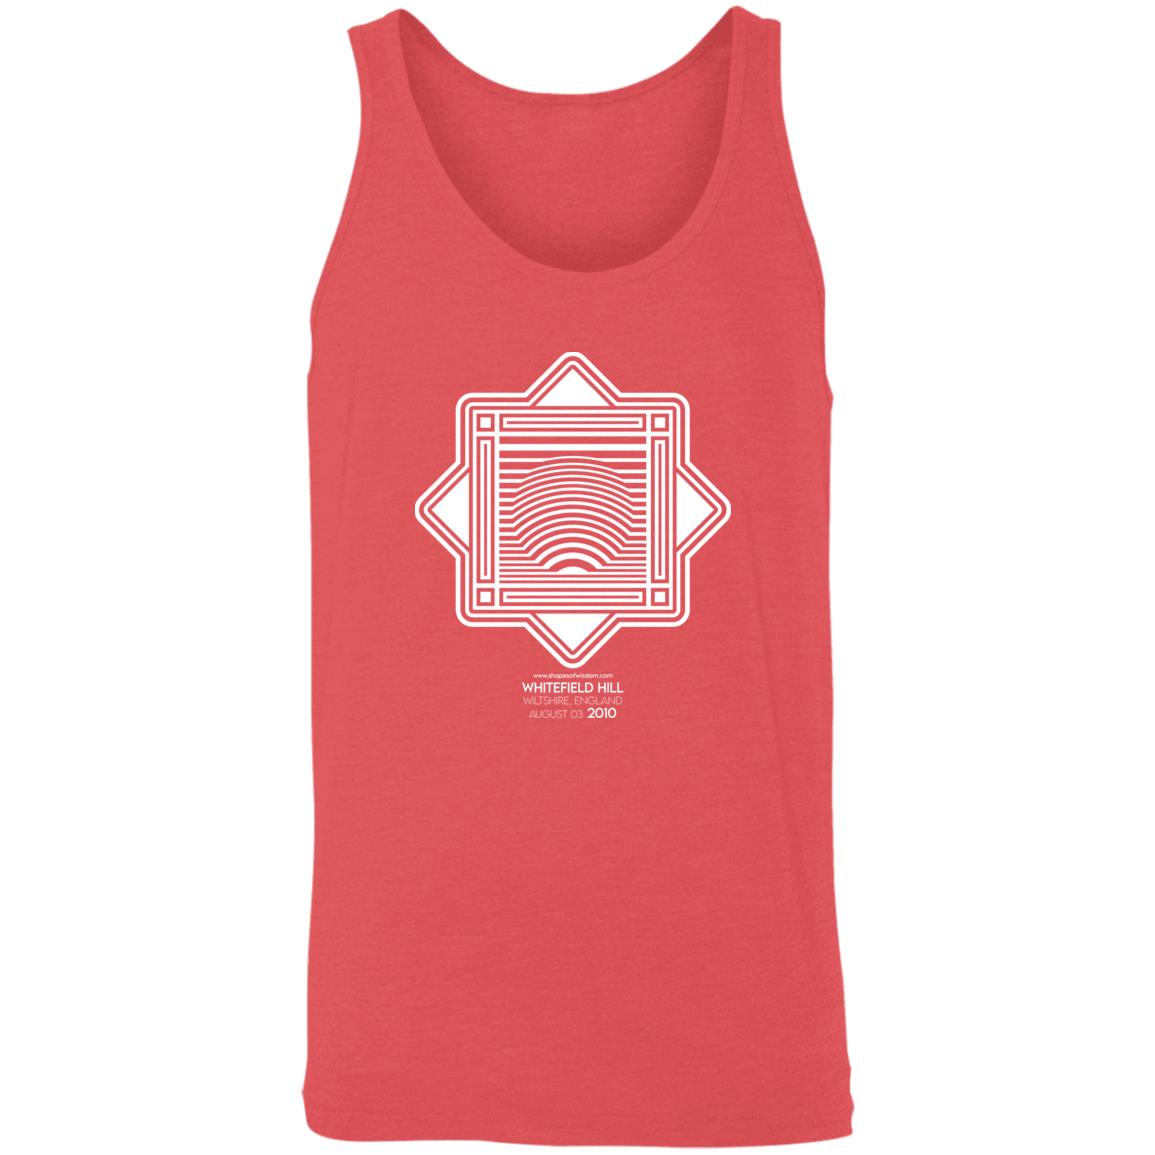 Crop Circle Tank Top - Whitefield Hill